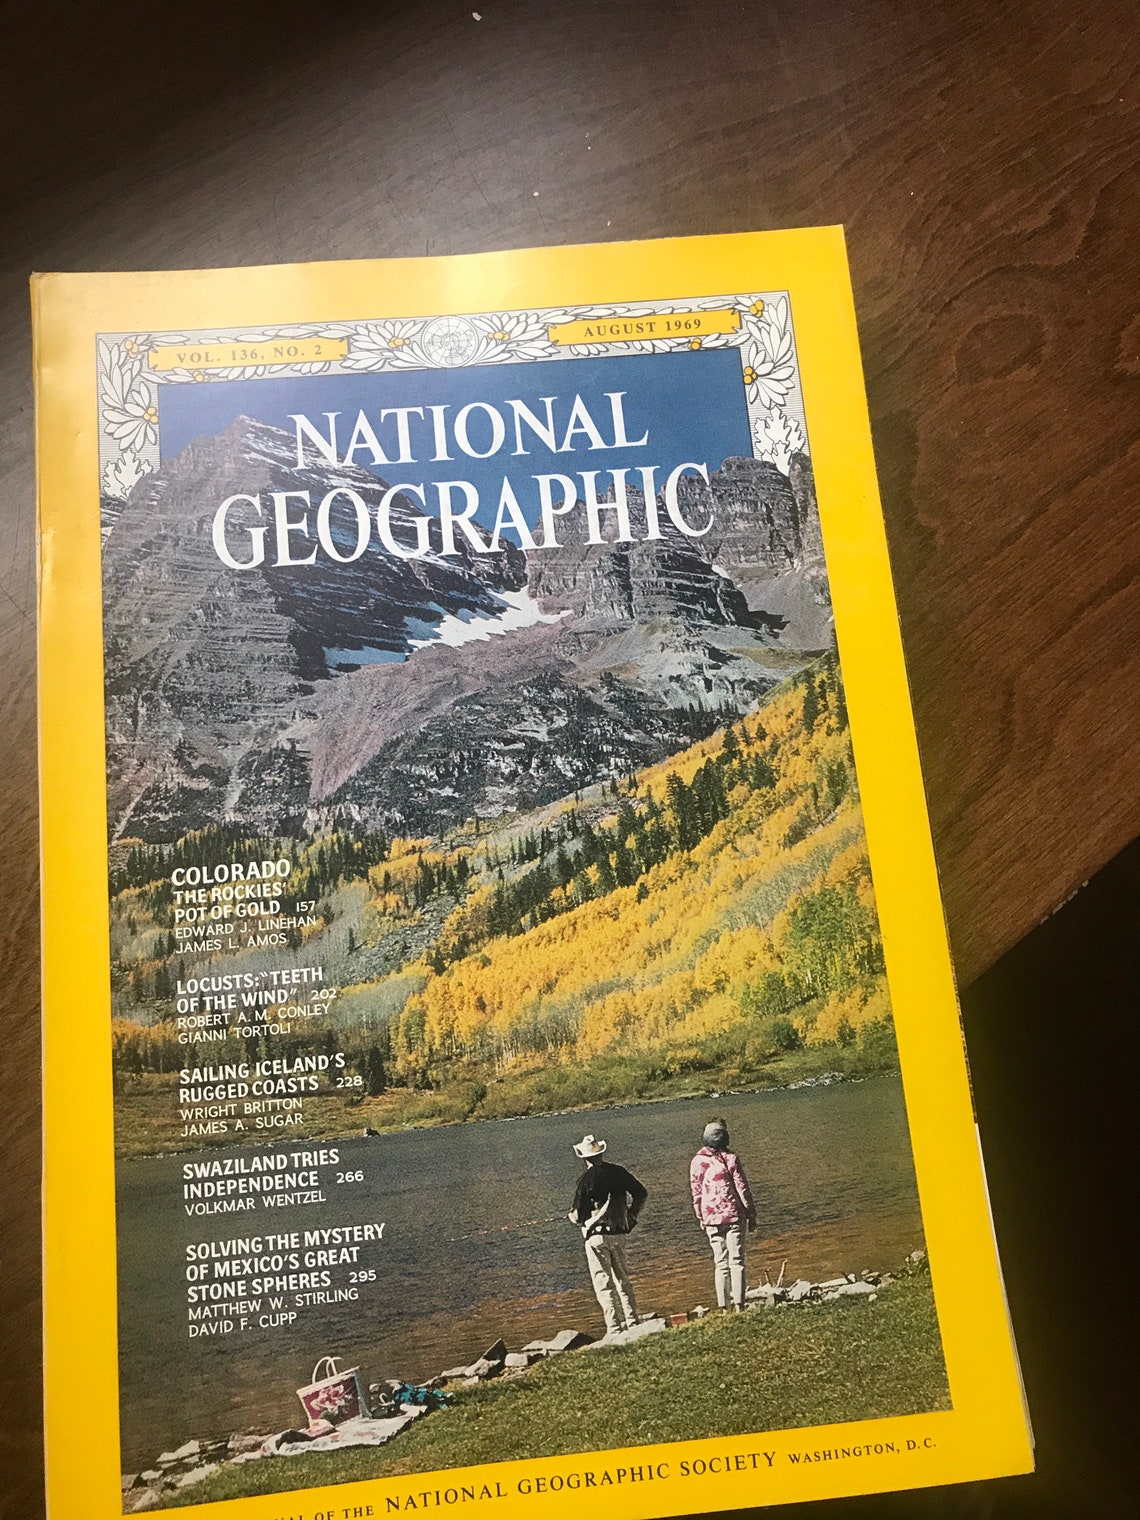 Set of 10 vintage National Geographic Magazines. All from 1969 | Etsy